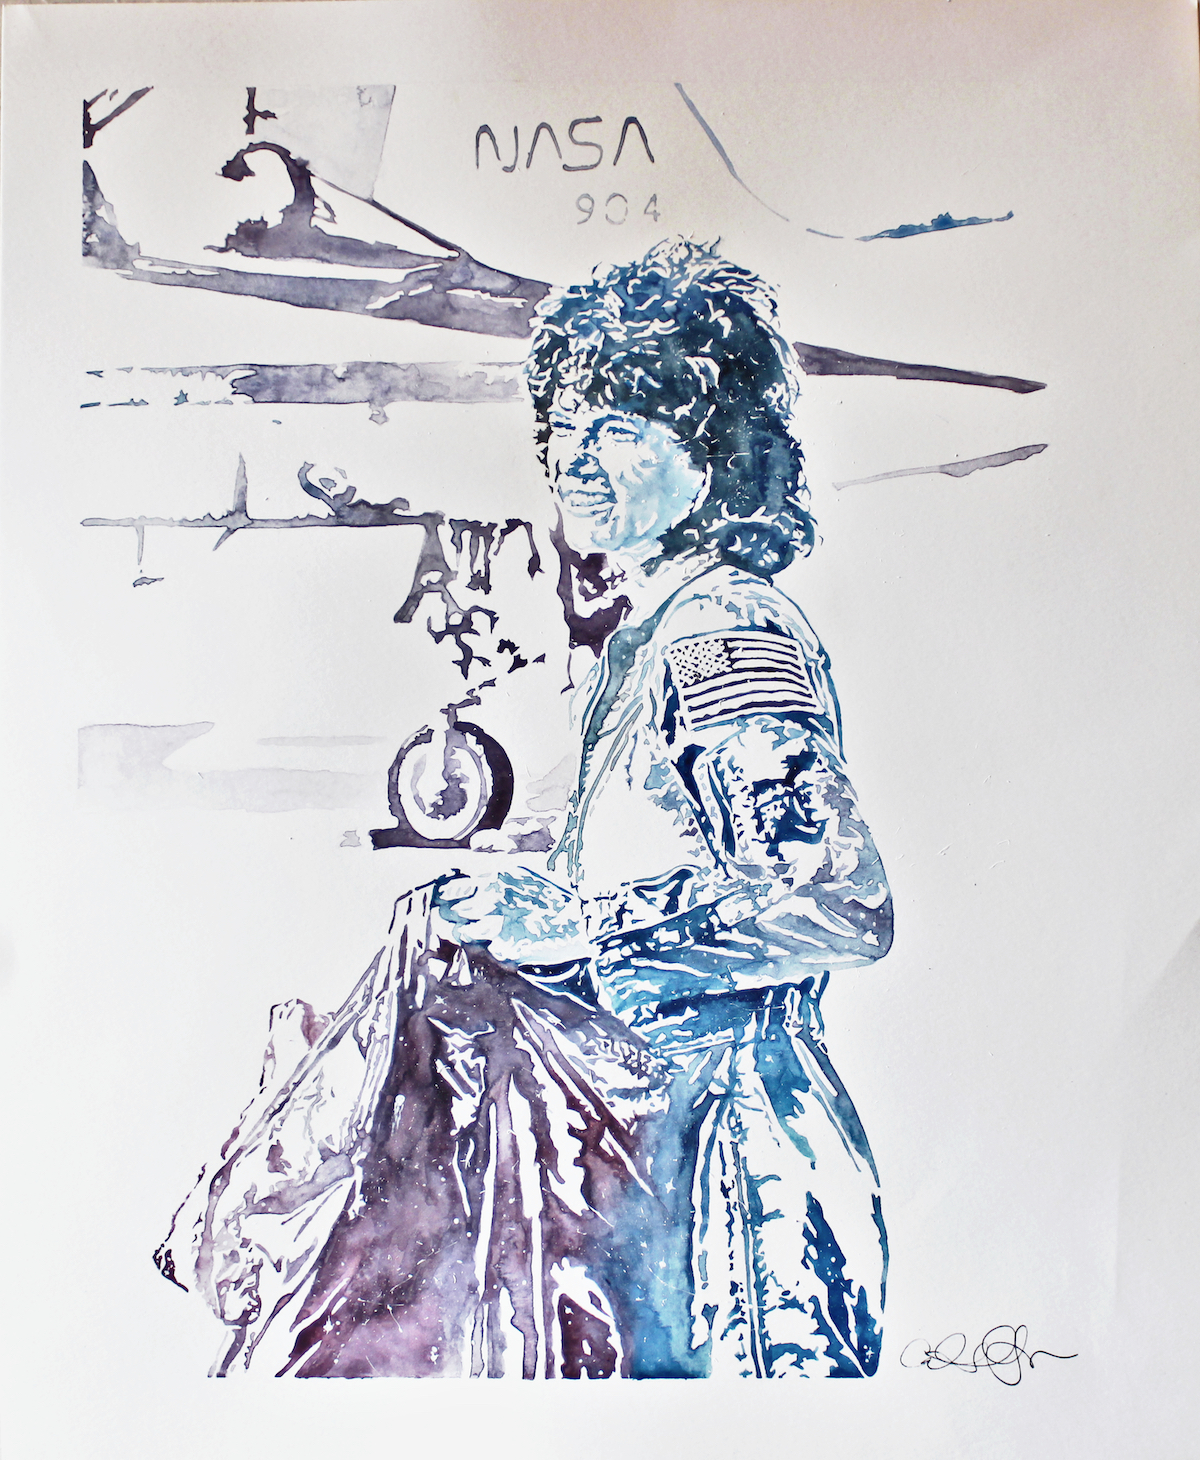 Watercolor painting of a young Sally Ride standing in front of a plane